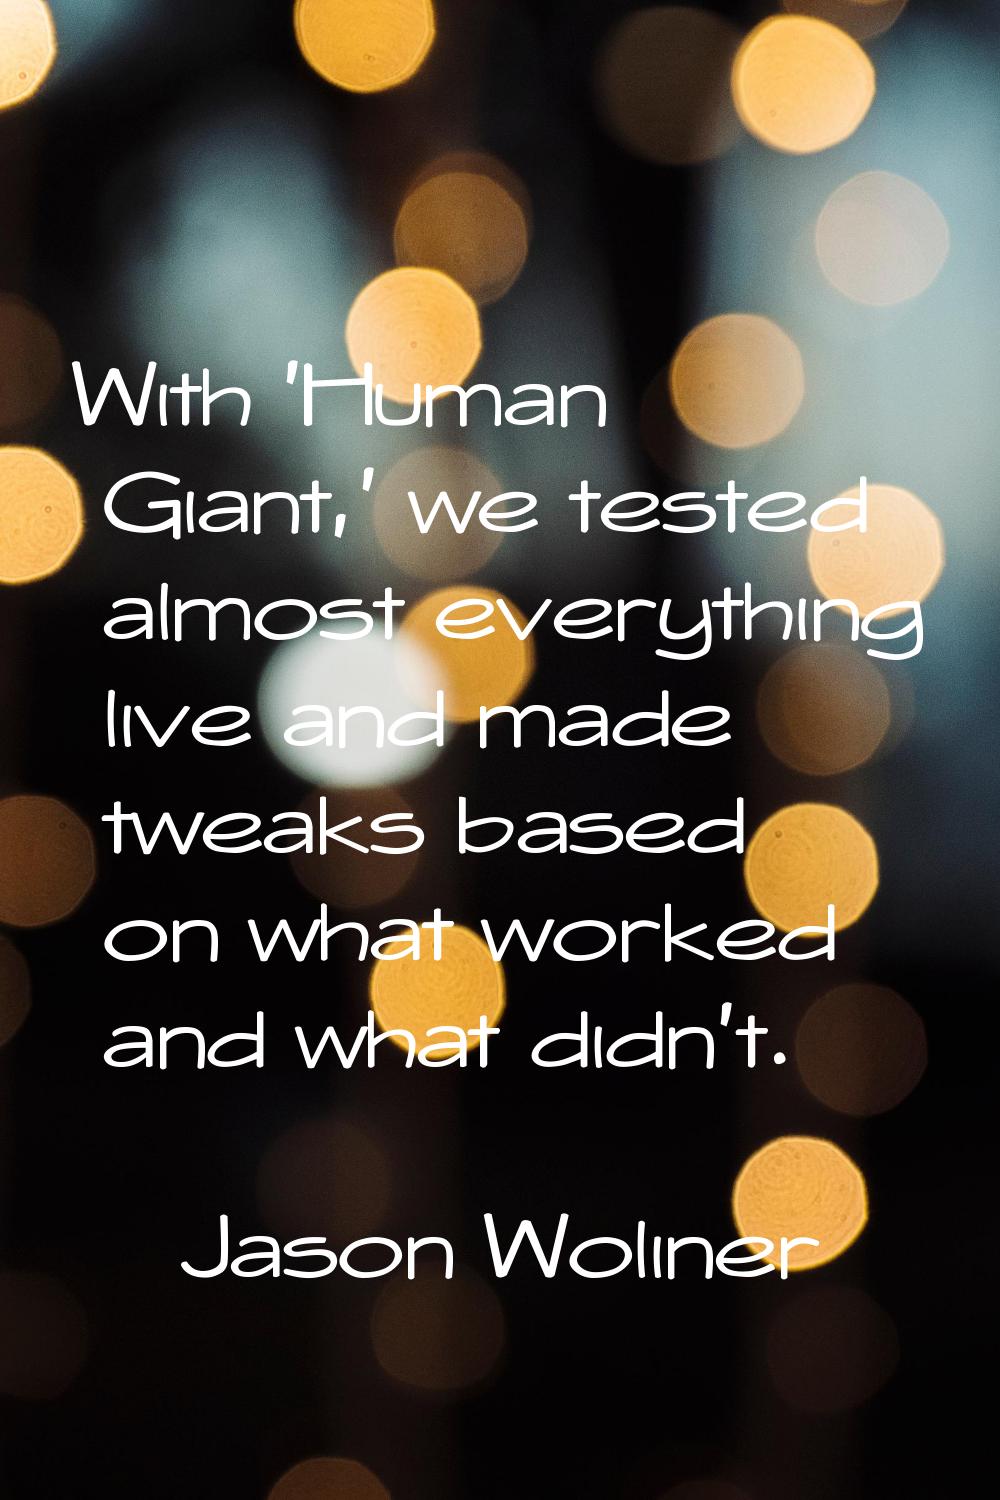 With 'Human Giant,' we tested almost everything live and made tweaks based on what worked and what 